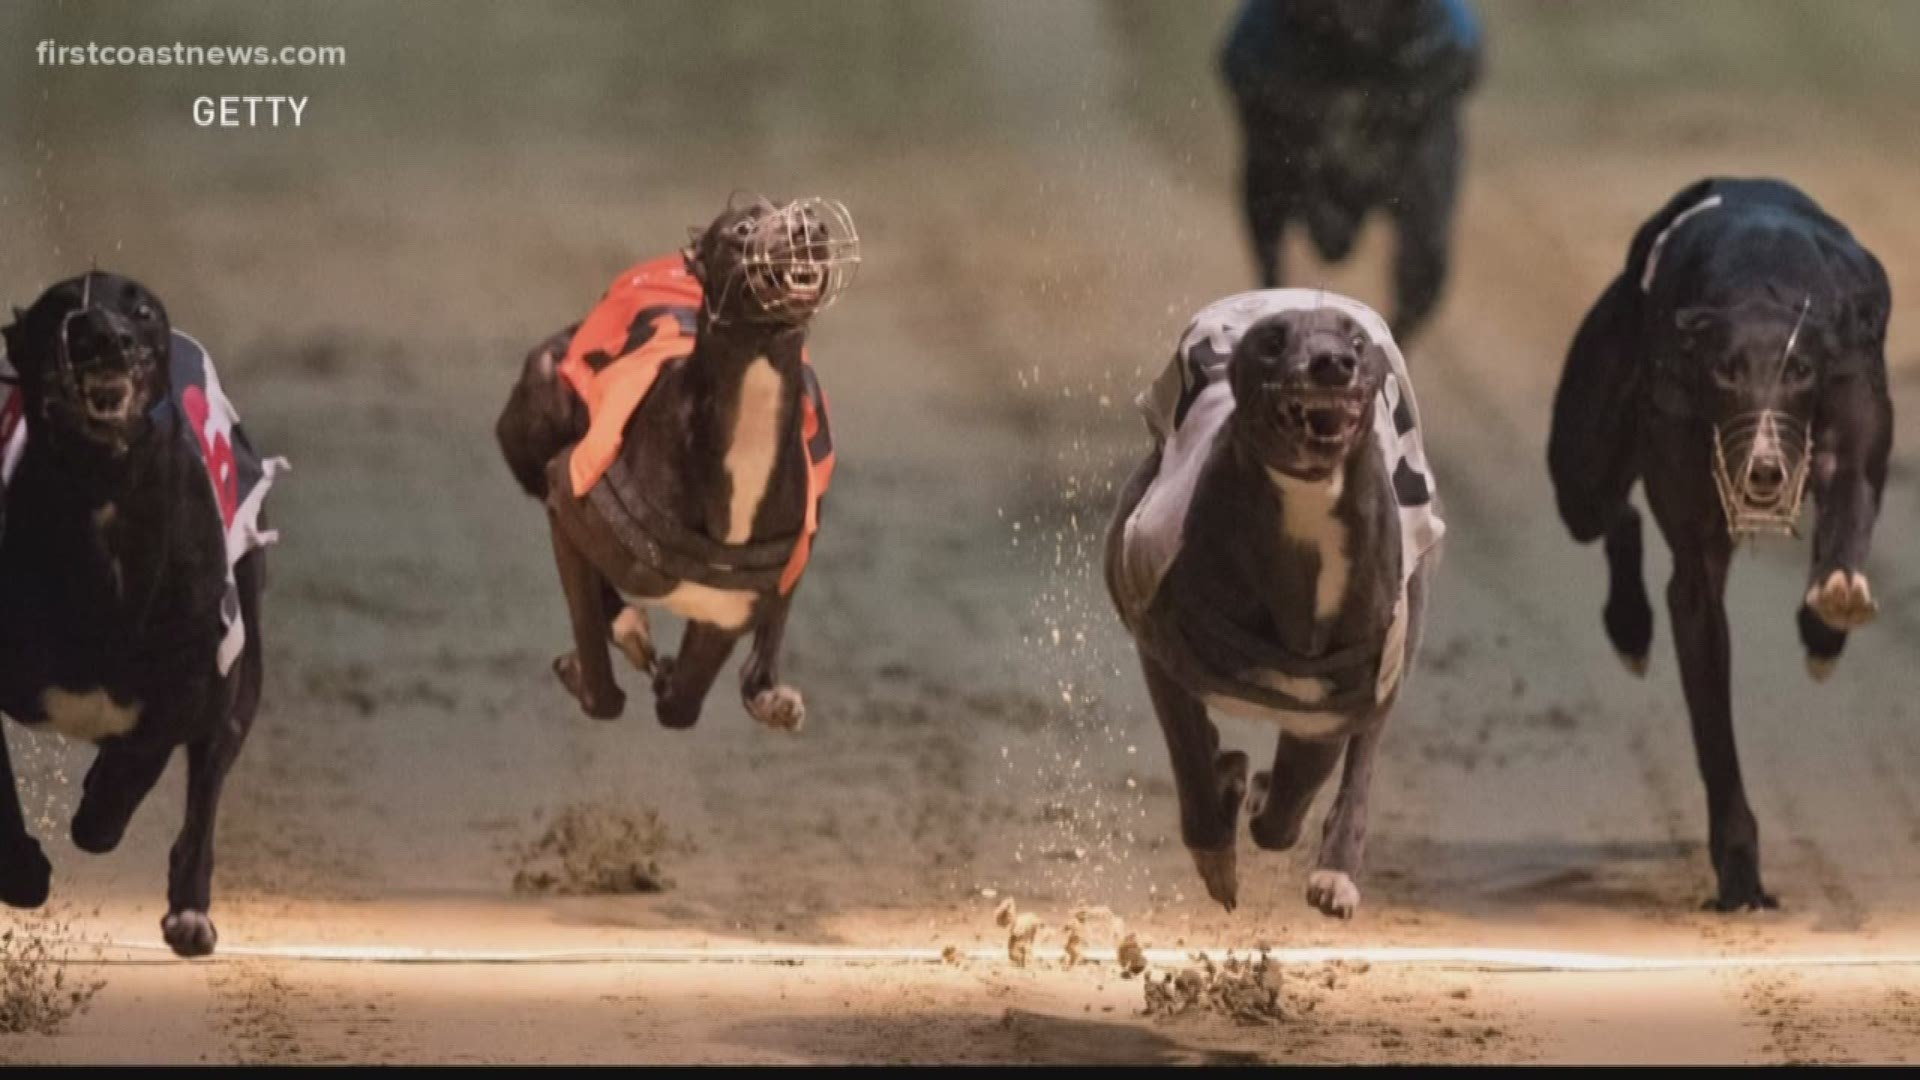 A Florida state senator says it's time to end greyhound racing for good across the state.